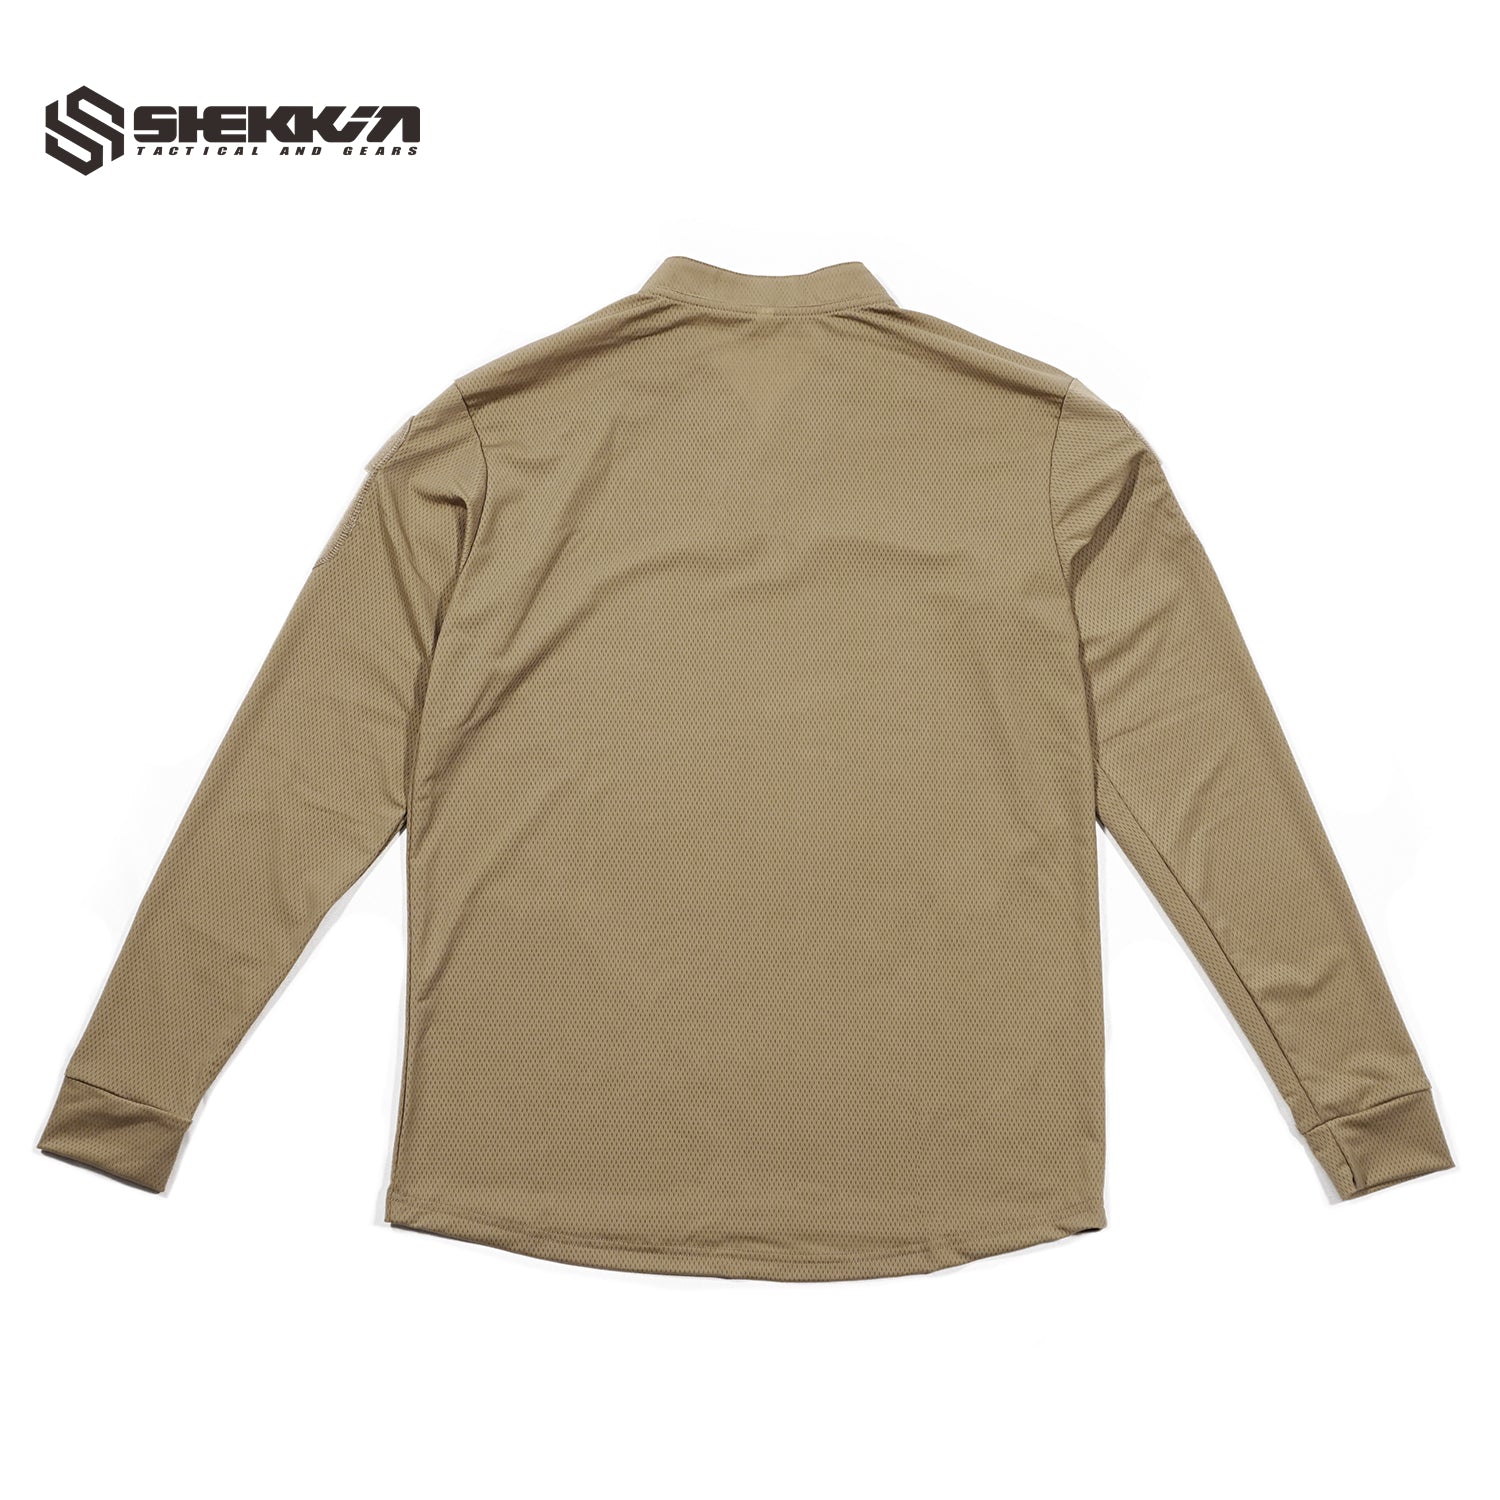 Velocity style BOSS Rugby Shirt long sleeves